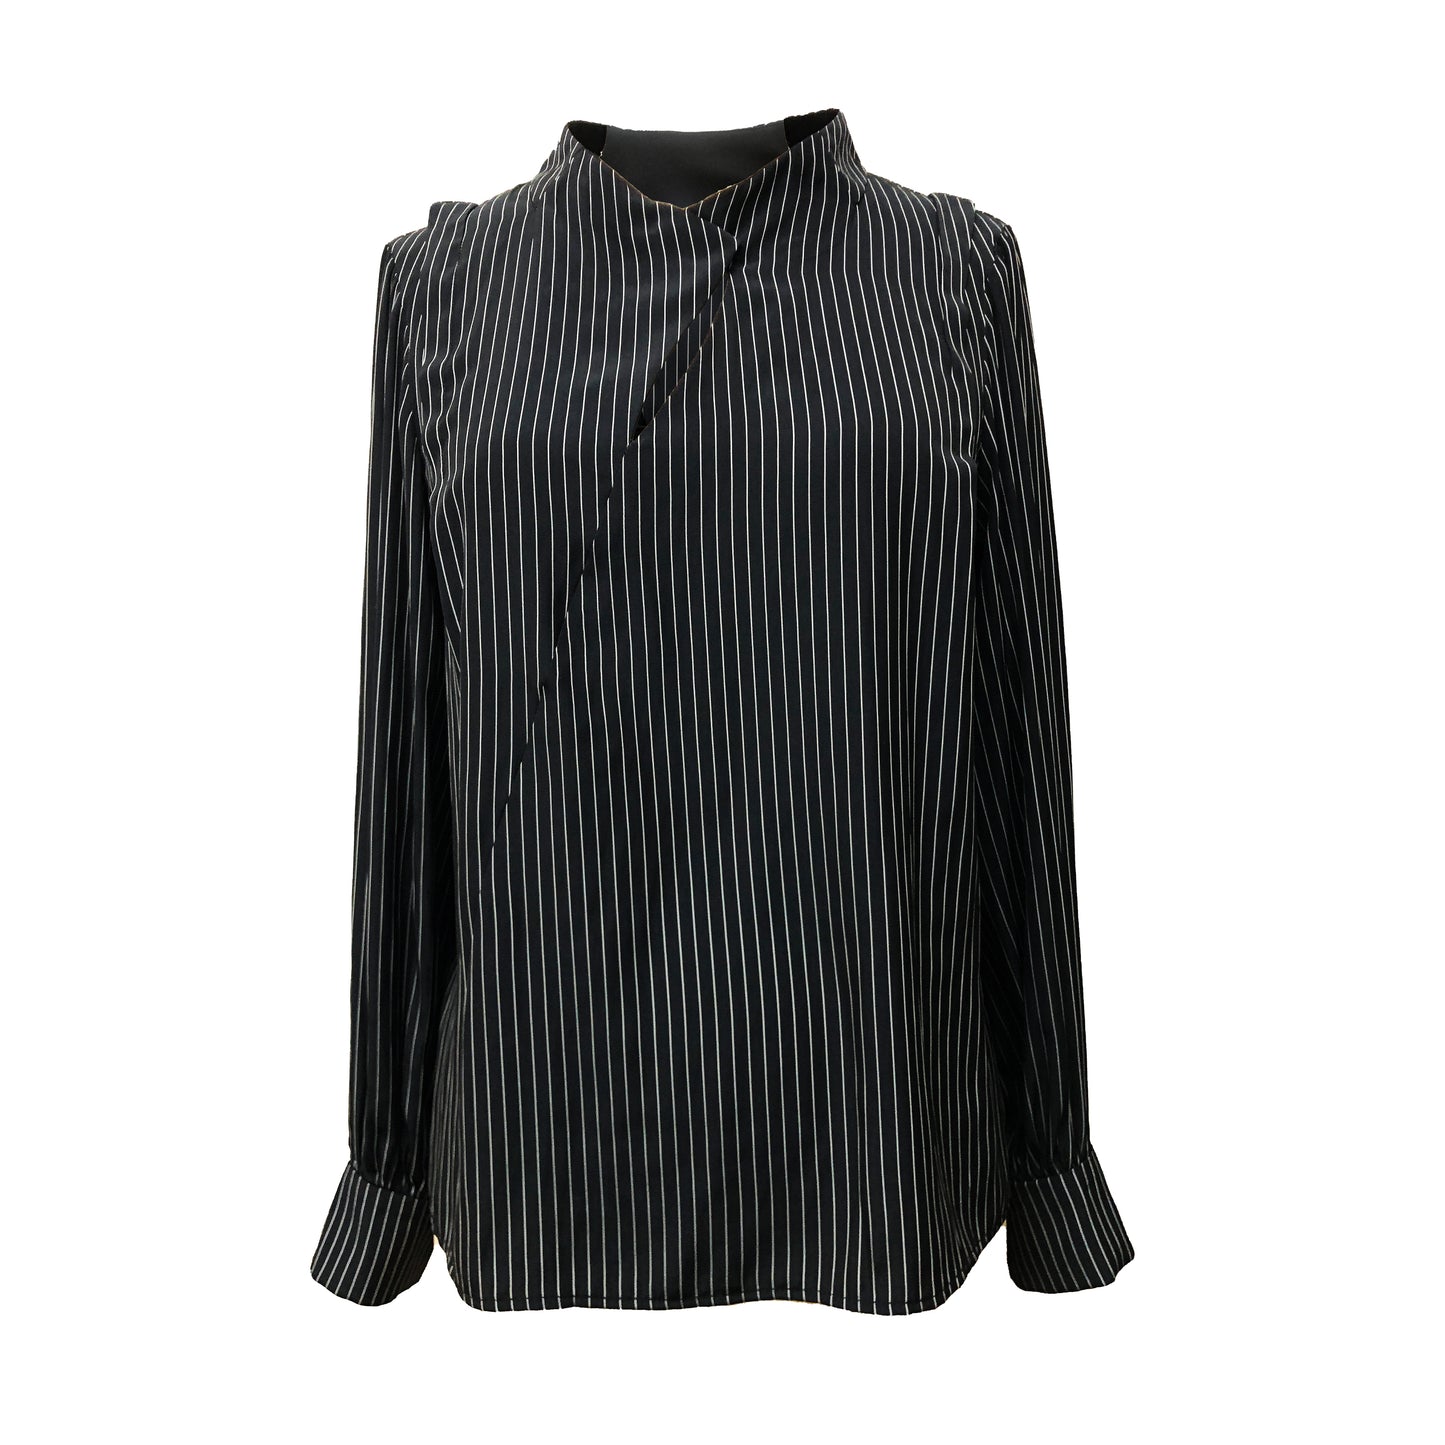 Black and white striped cupro blouse